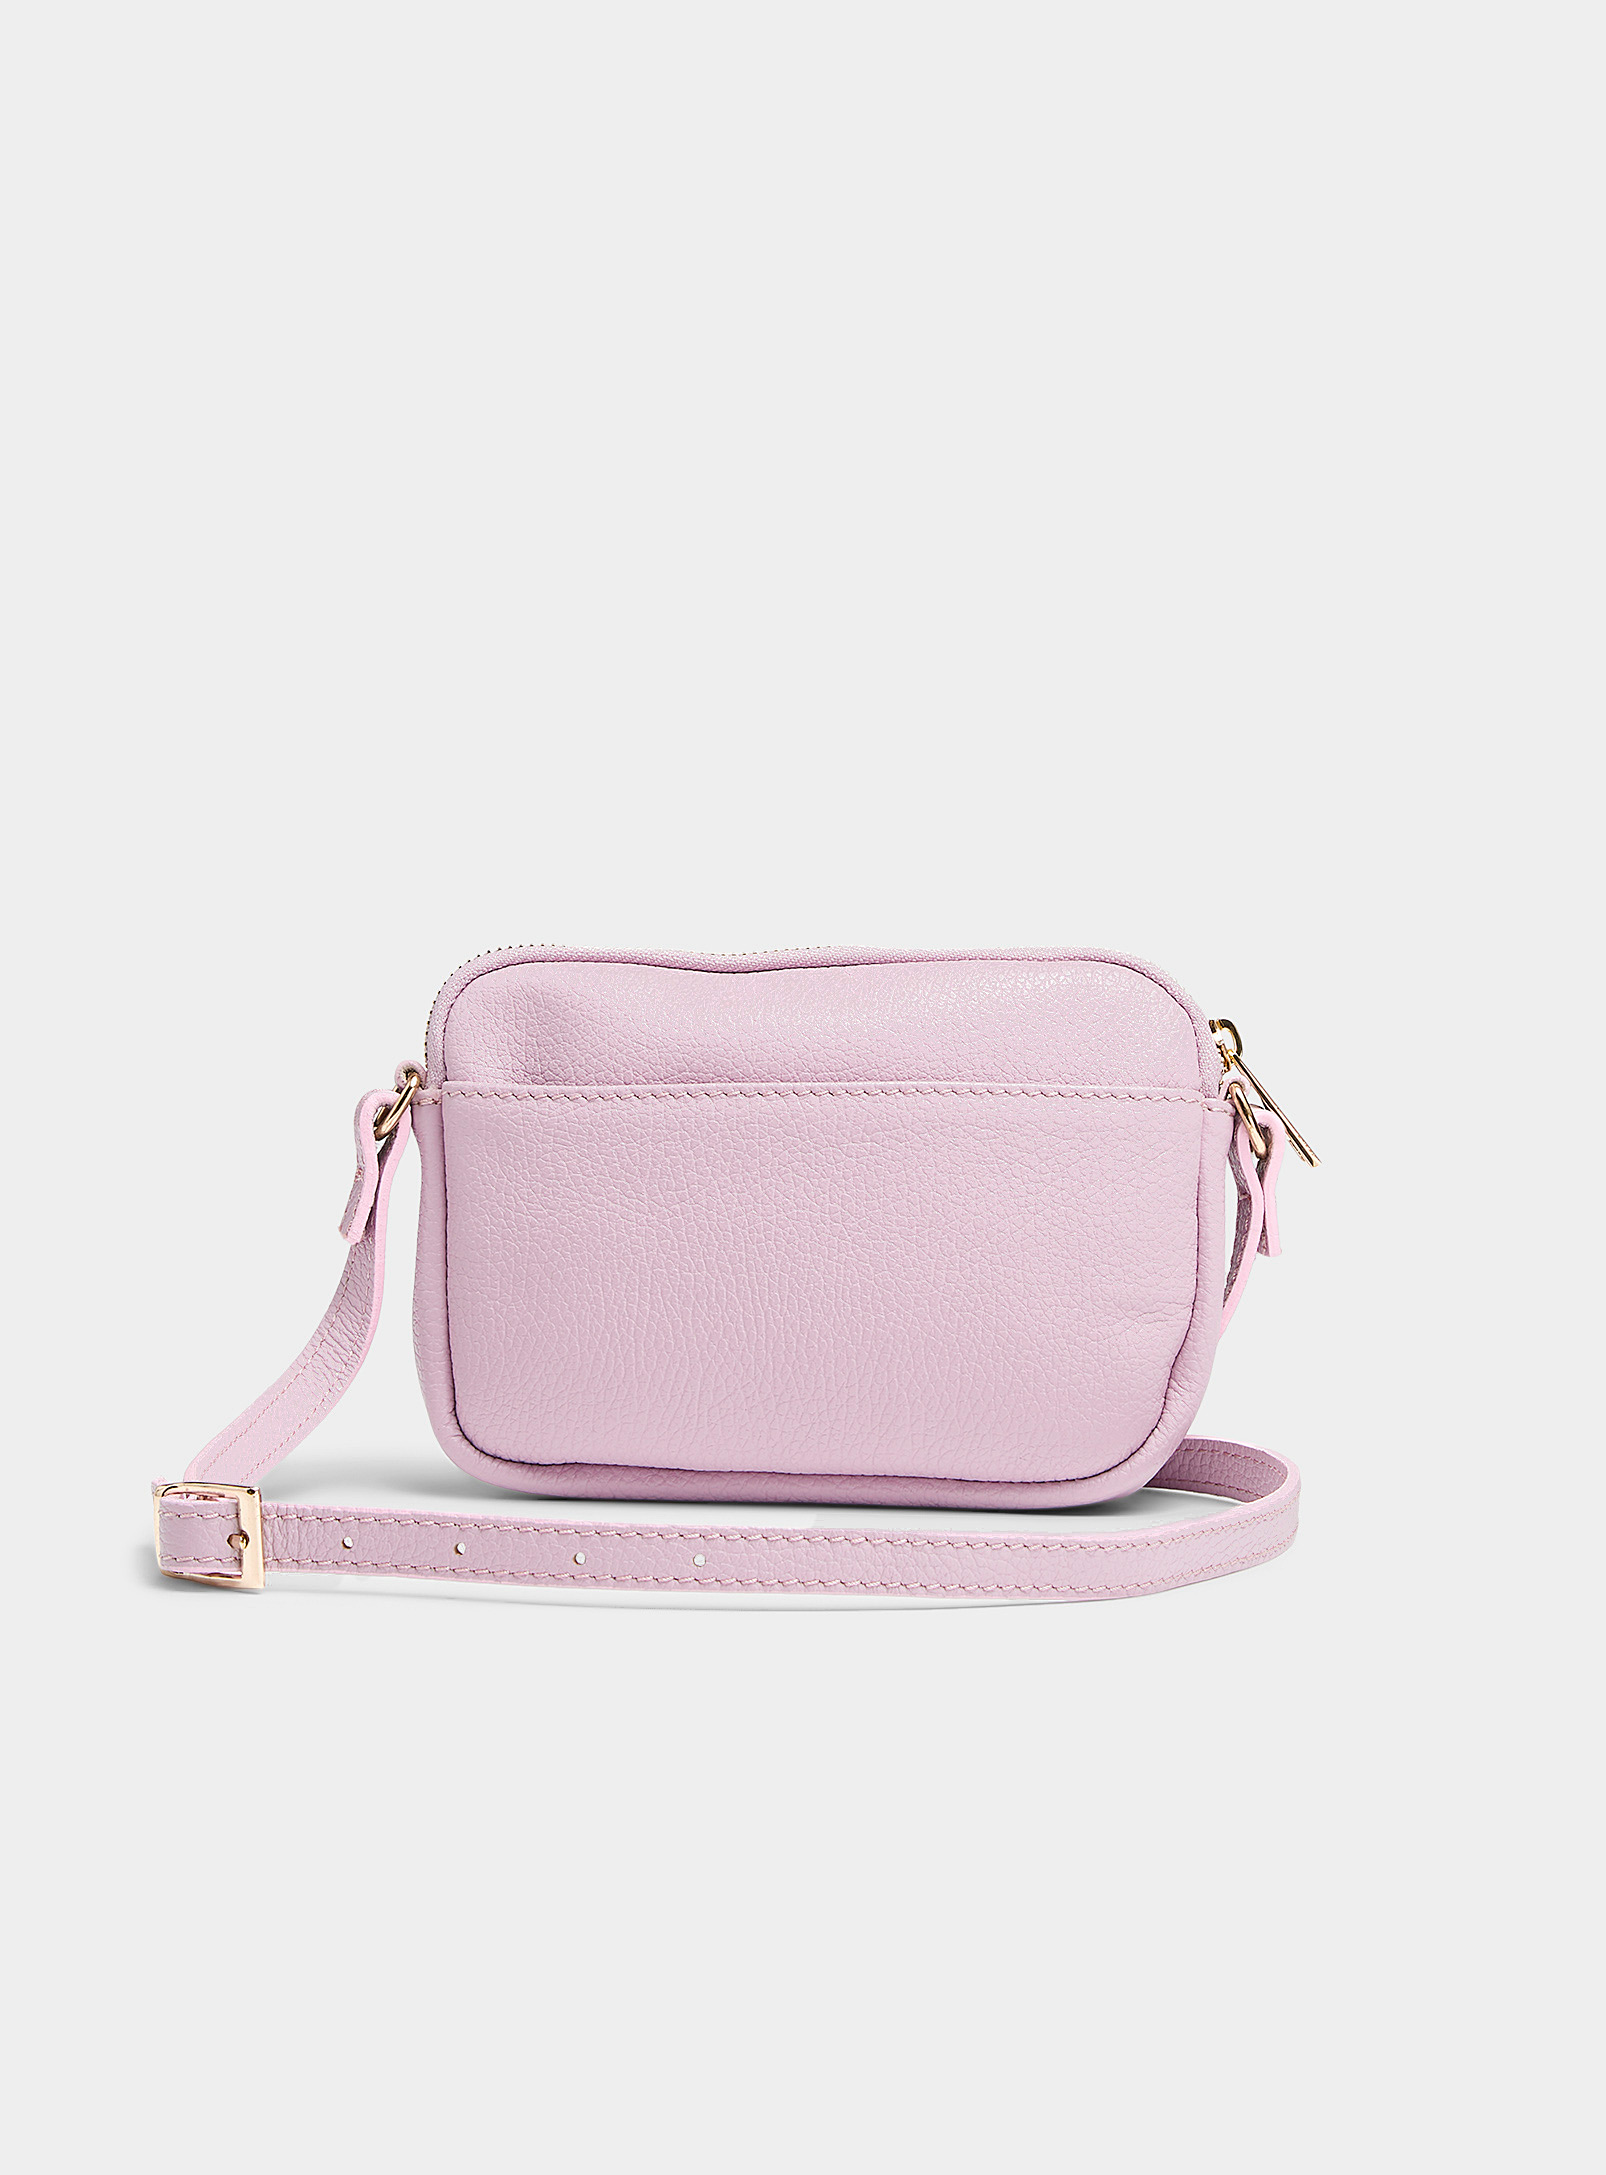 Simons - Women's Small pebbled leather rectangular shoulder bag Exclusive collection from Italy